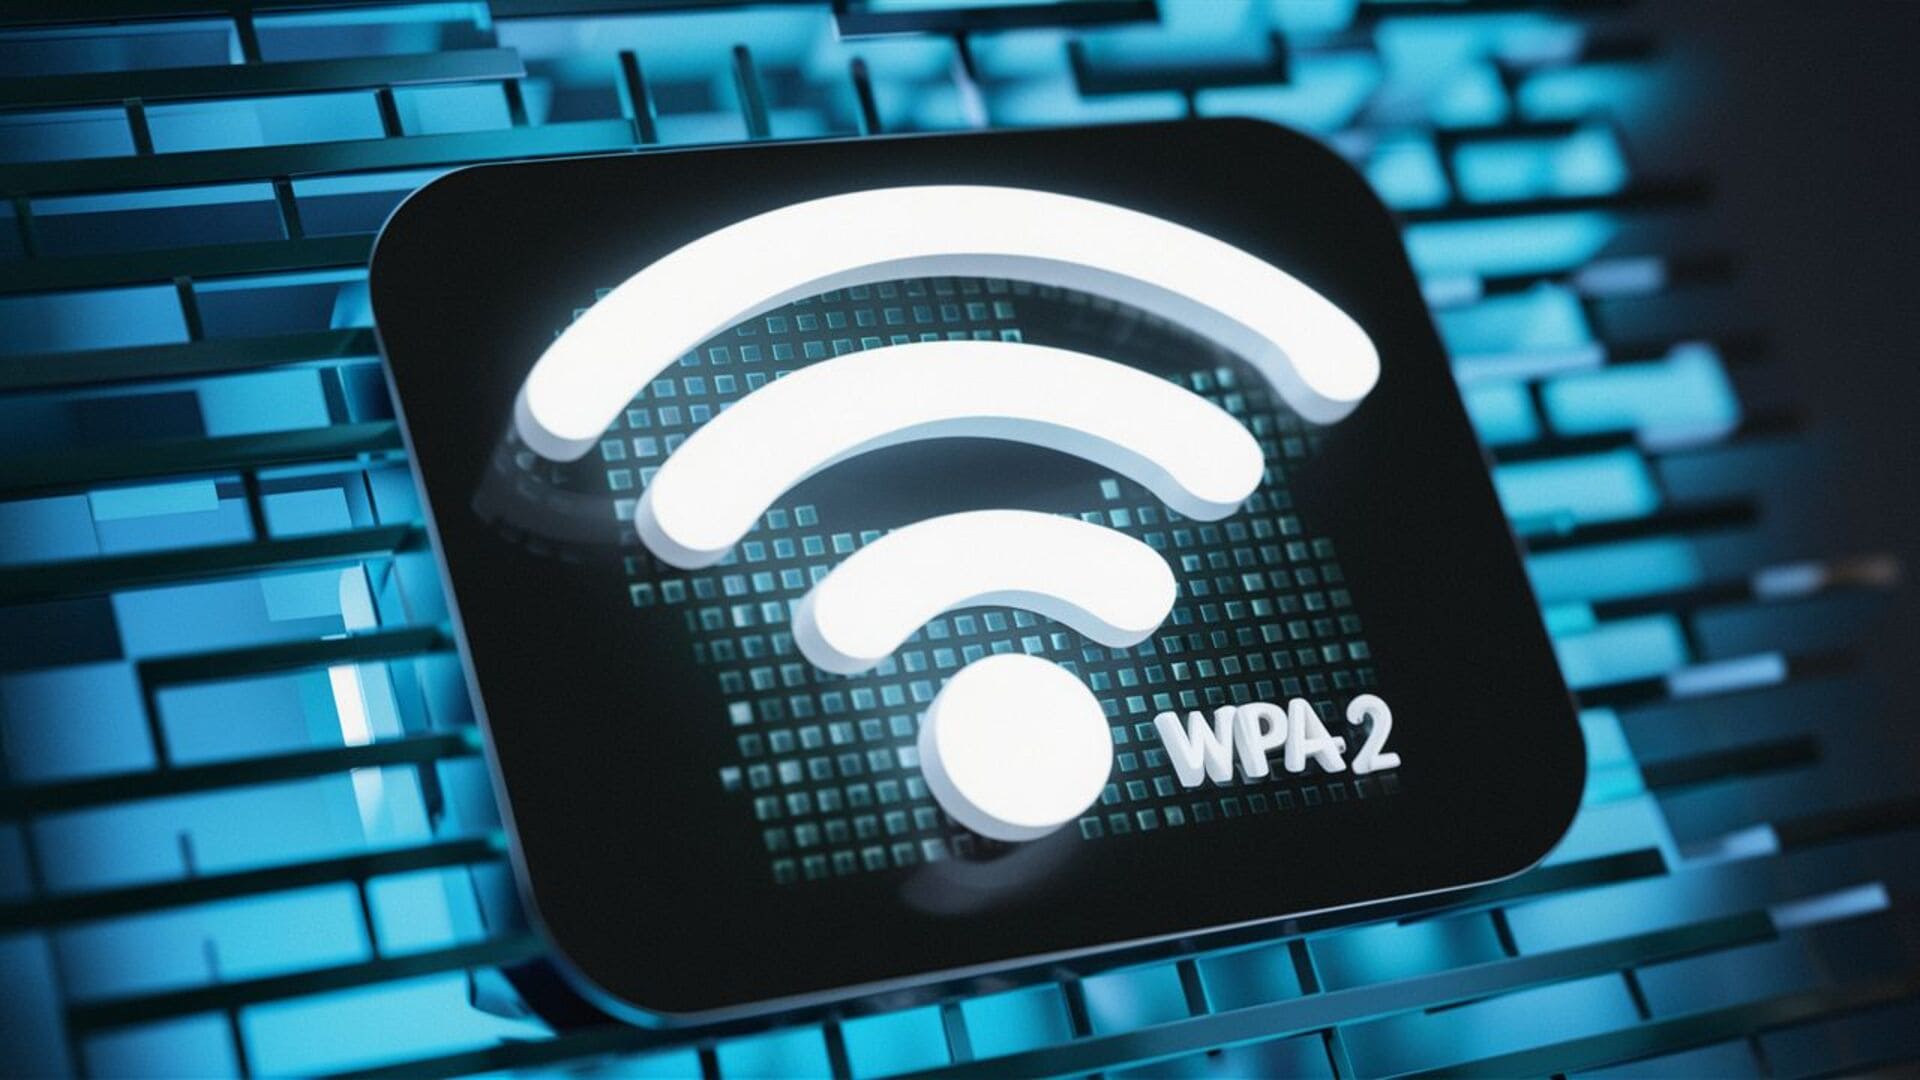 Wifi security wpa2; WiFi Hack Possible Or Not